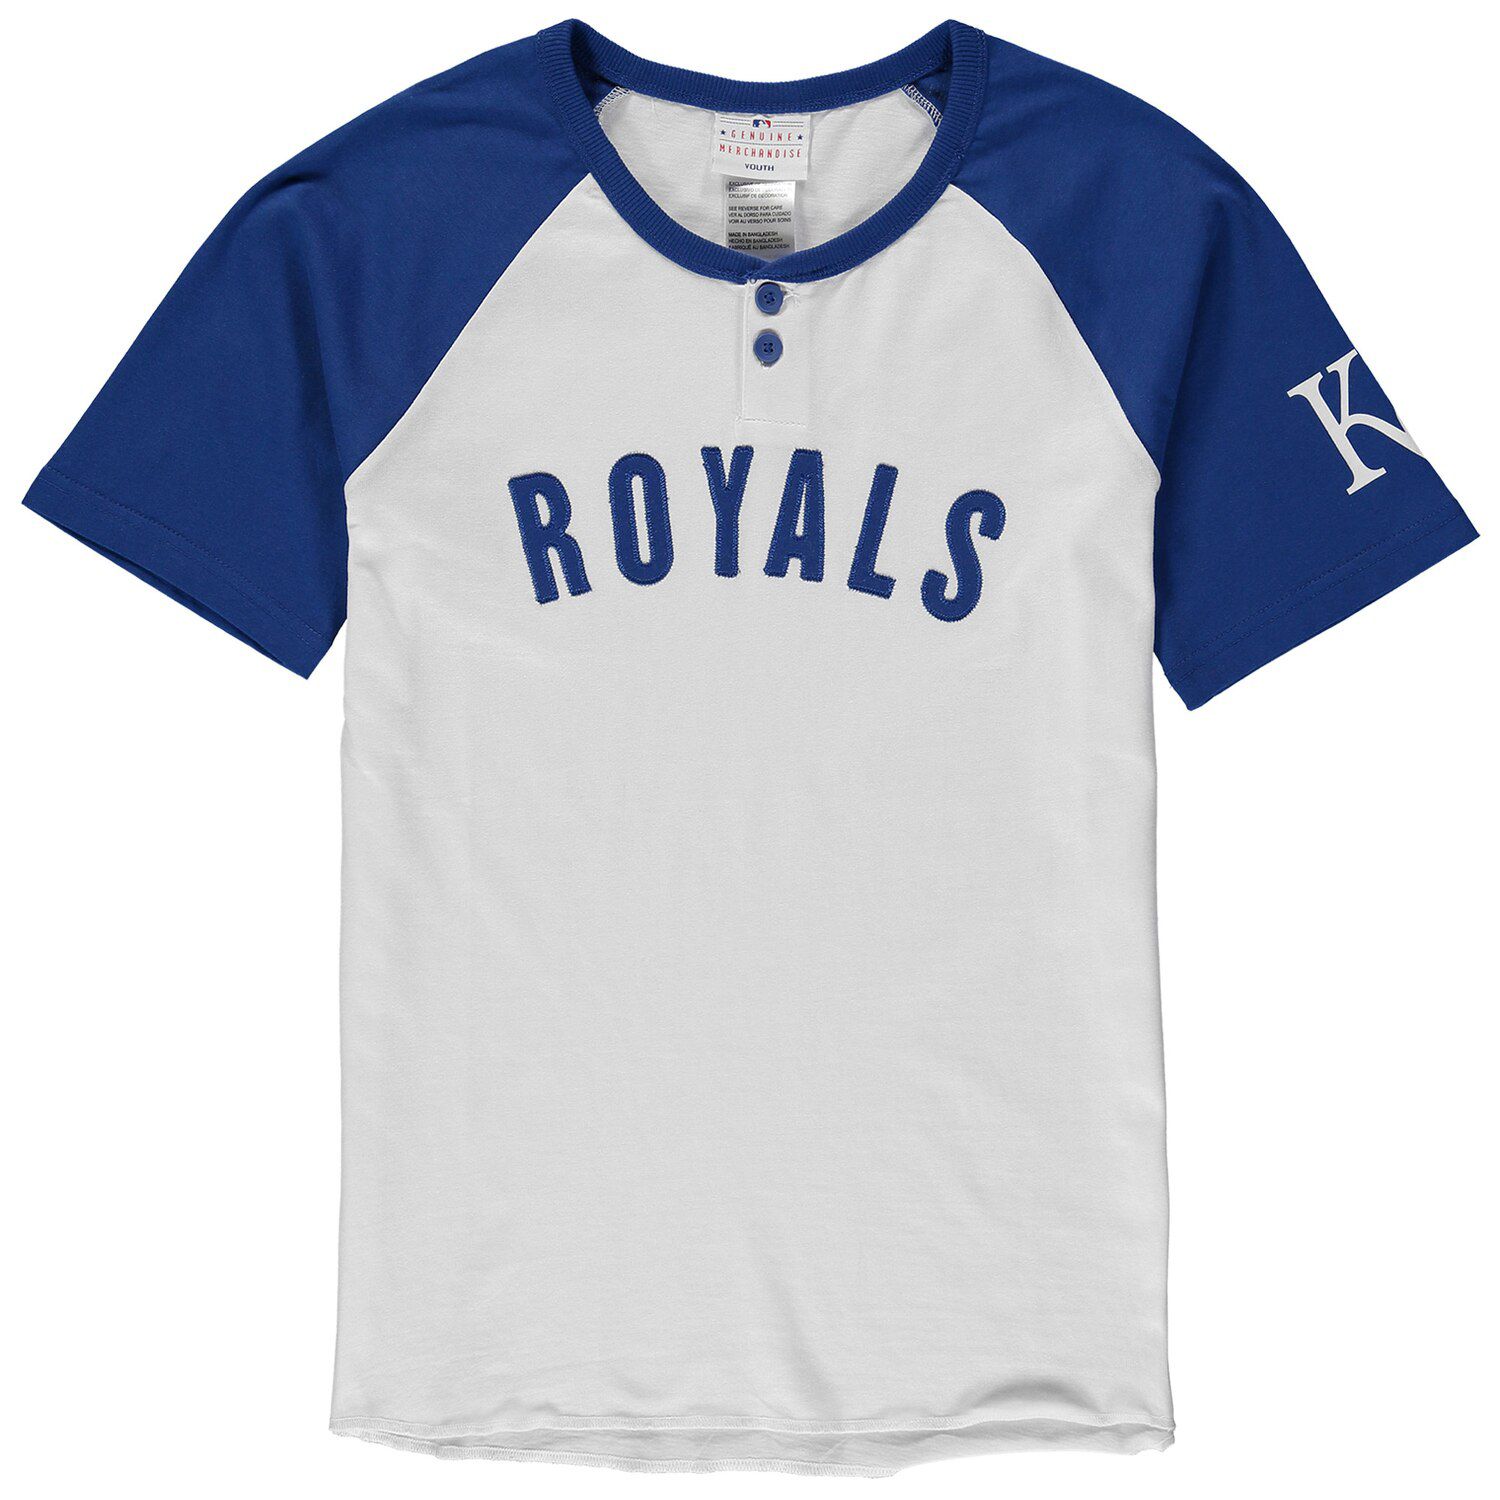 royals jersey youth